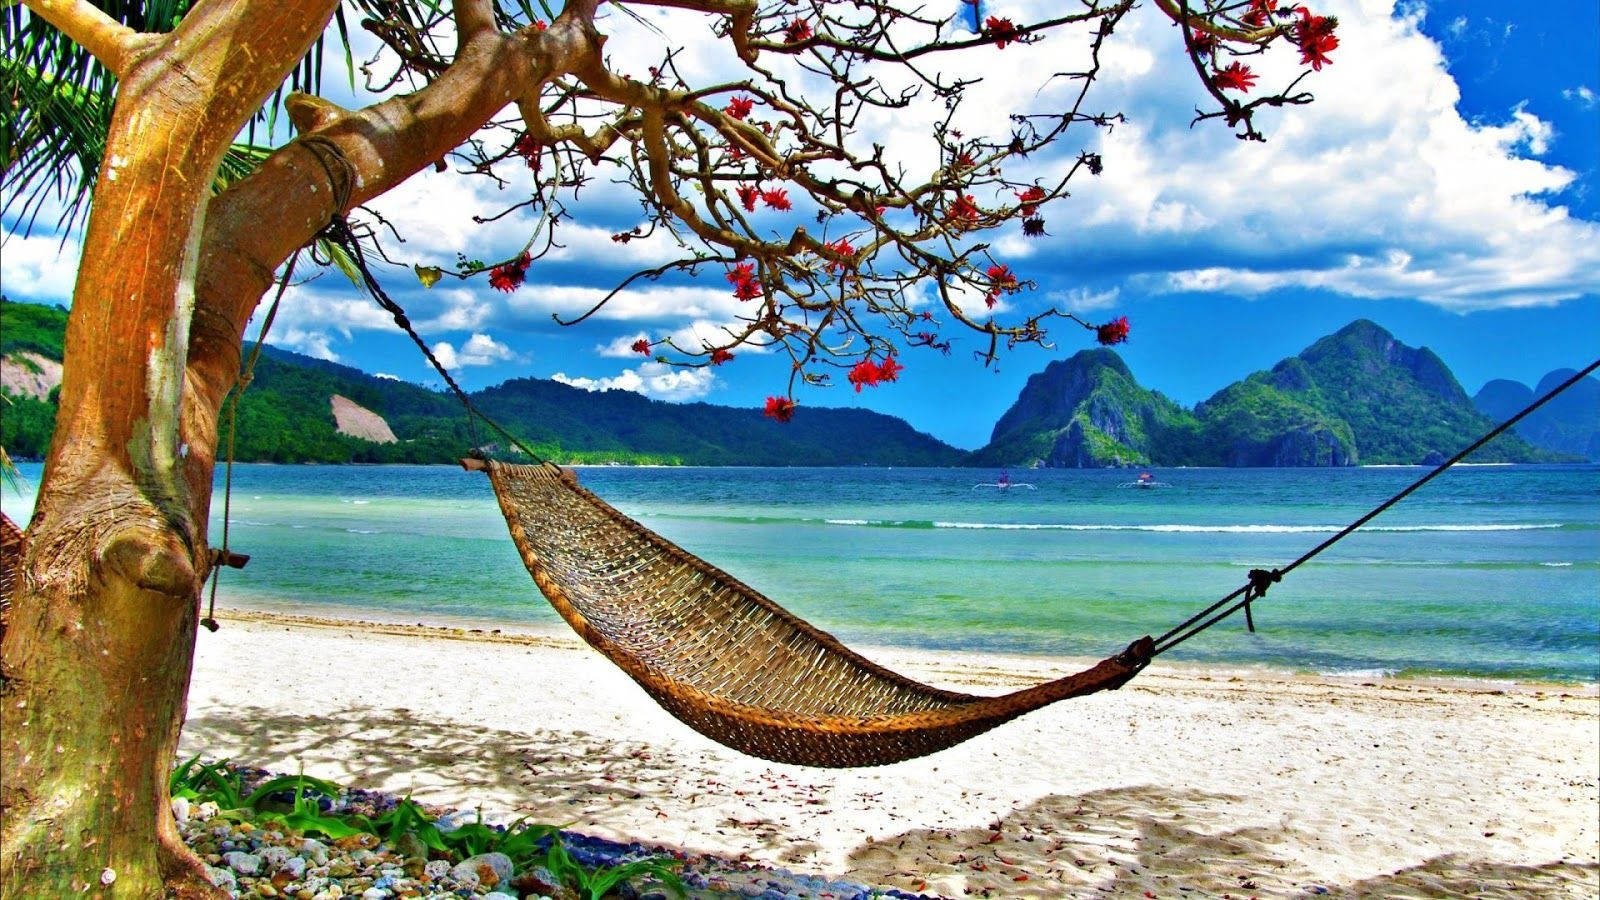 A Hammock Hanging On A Tree On A Beach Background